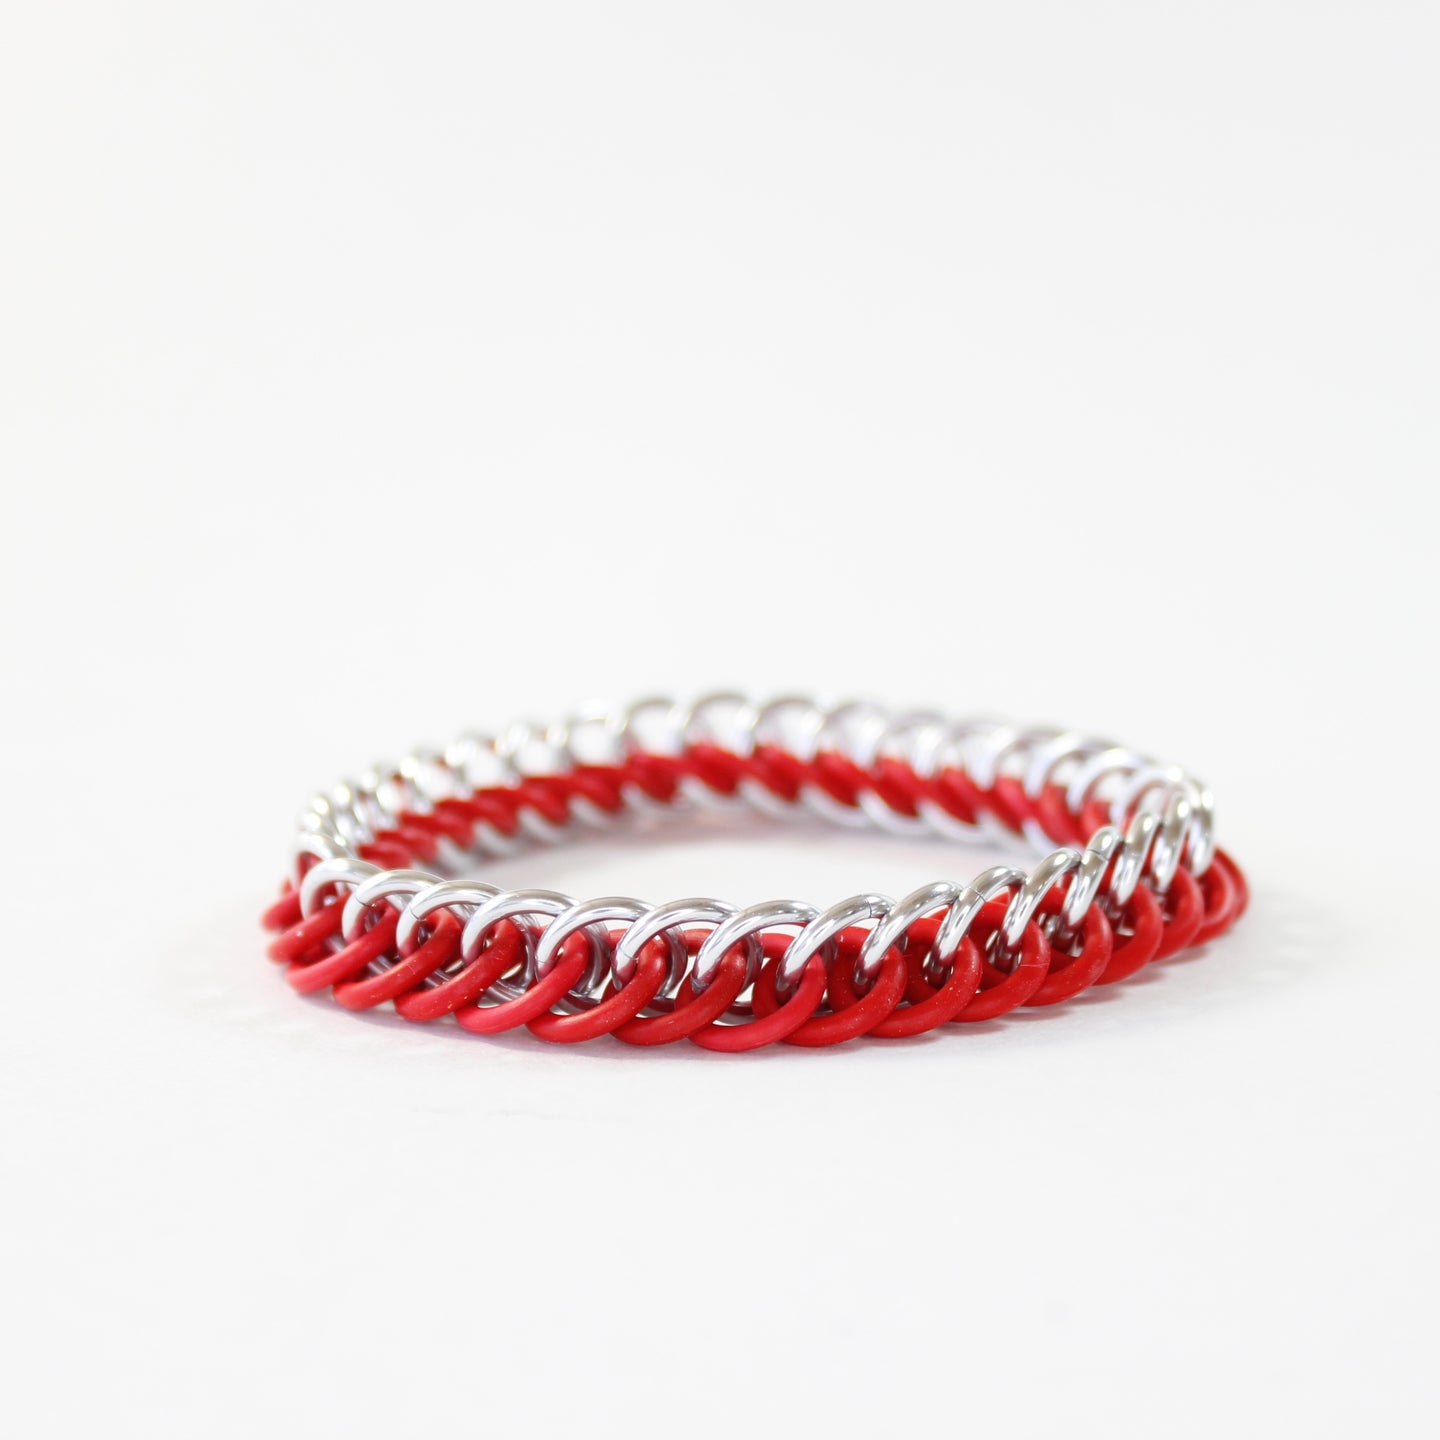 The Persian Stretch Bracelet in Red + Silver